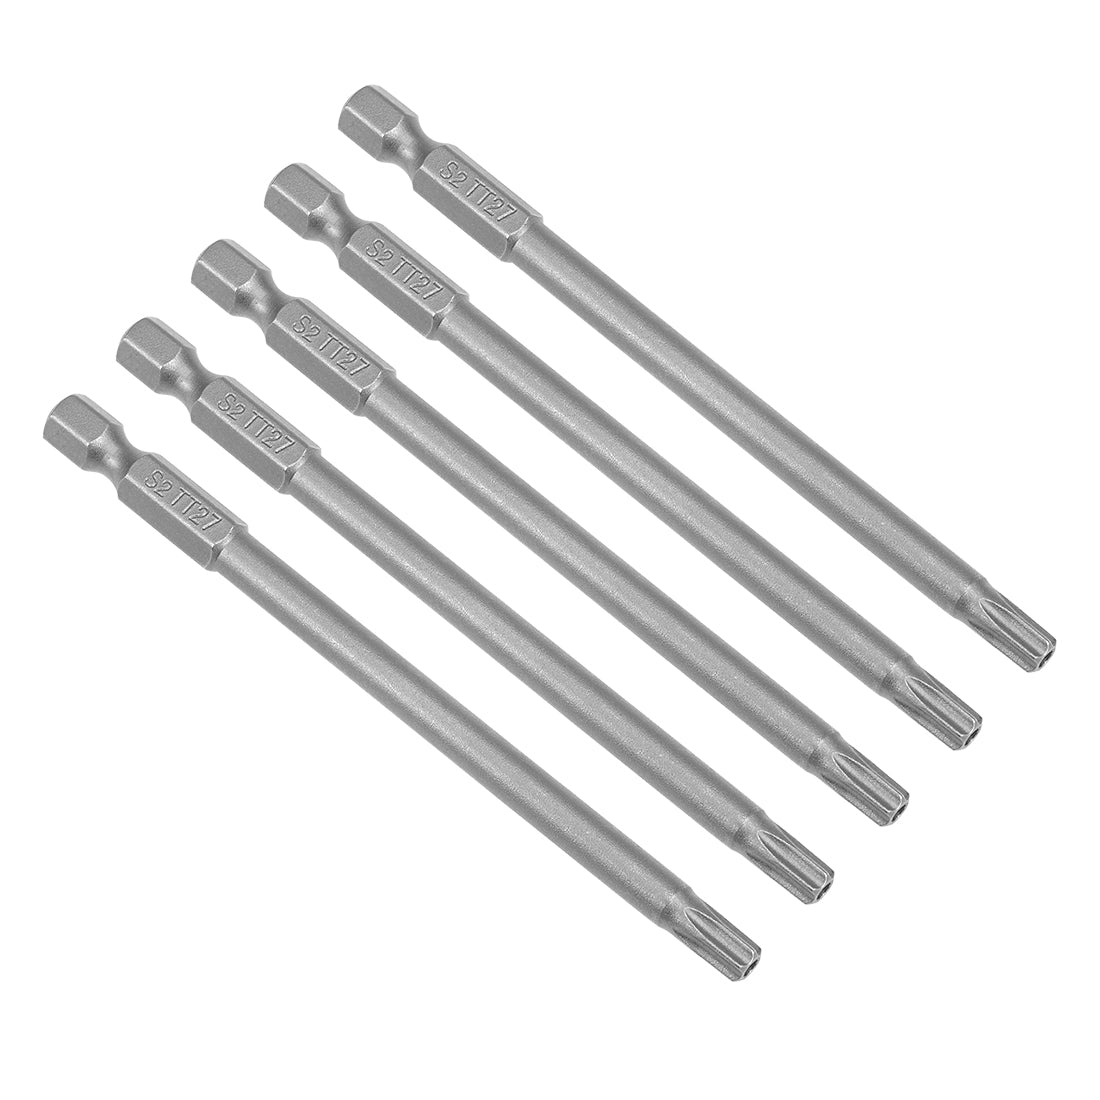 uxcell Uxcell 5Pcs 1/4" Hex Shank 100mm Length Magnetic Torx Security Head T27 Screwdriver Bits S2 Alloy Steel